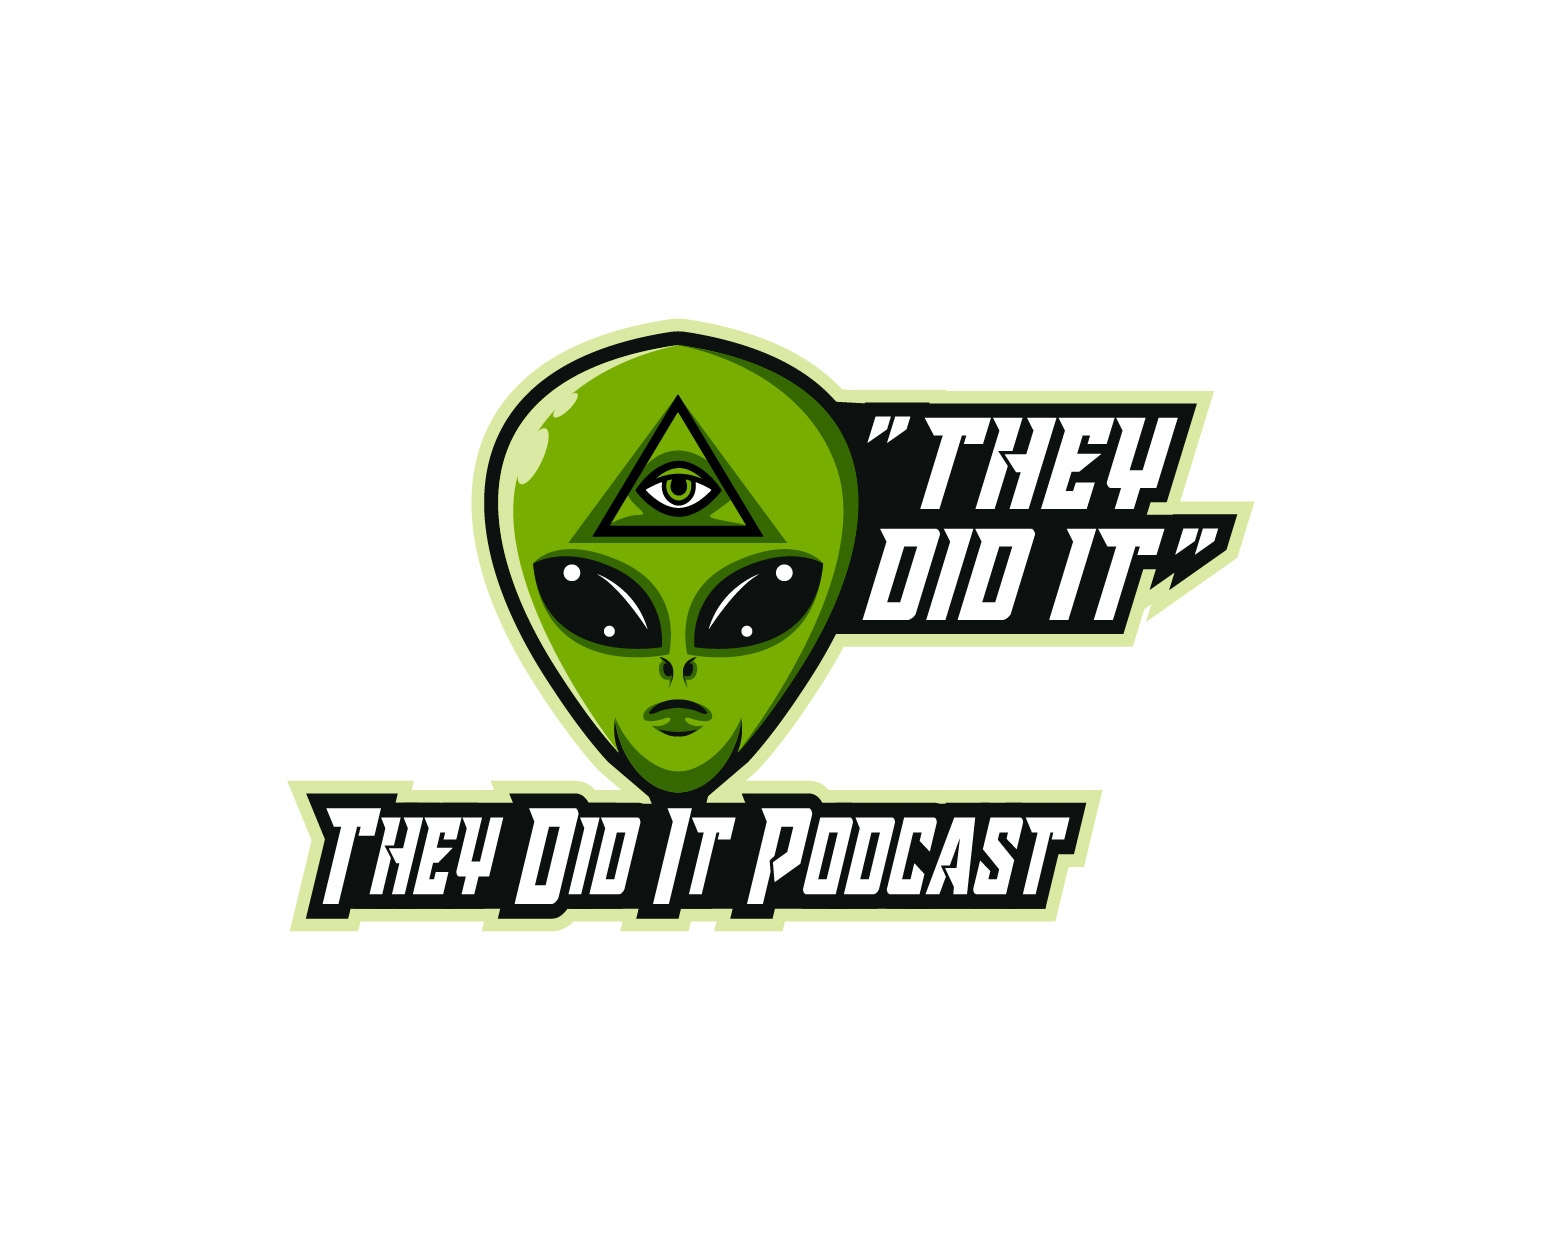 They Did It Podcast